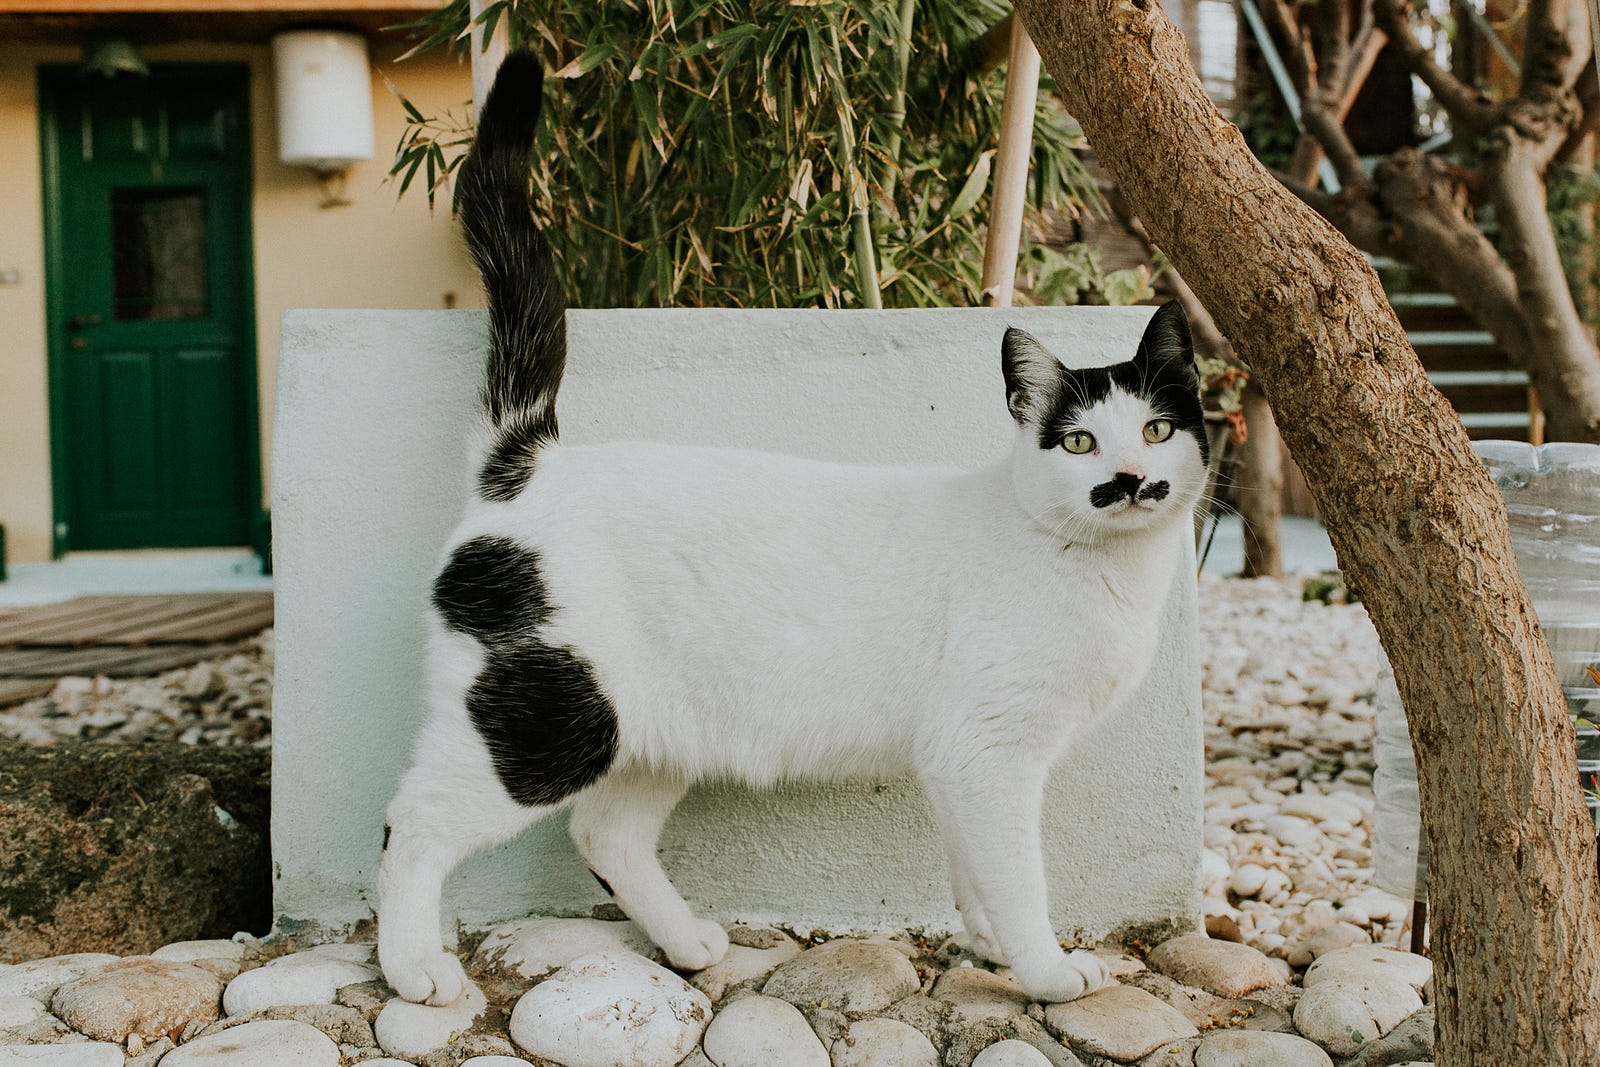 A black and white cat poses in front of a white planter, showing off its mustache.